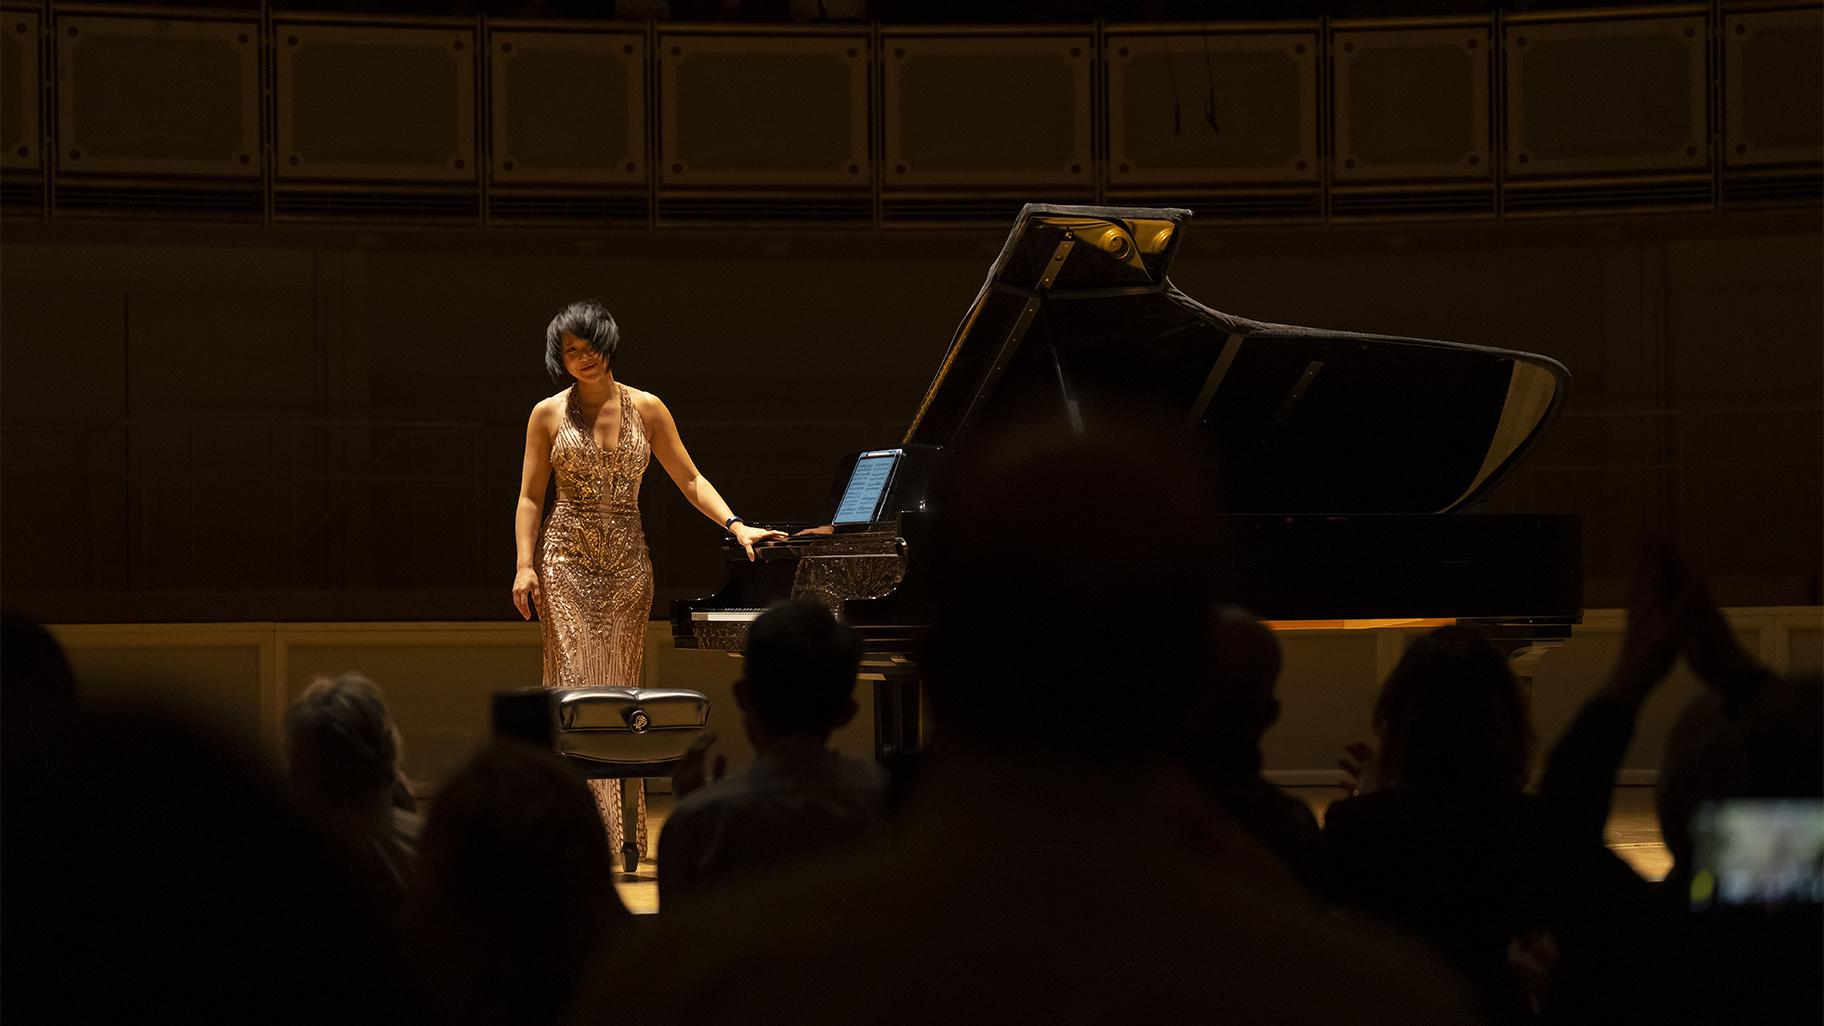 Yuja Wang acknowledges the audience following a program with works by Bach, Beethoven, and Schoenberg April 10, 2022. (Credit: Todd Rosenberg photography)